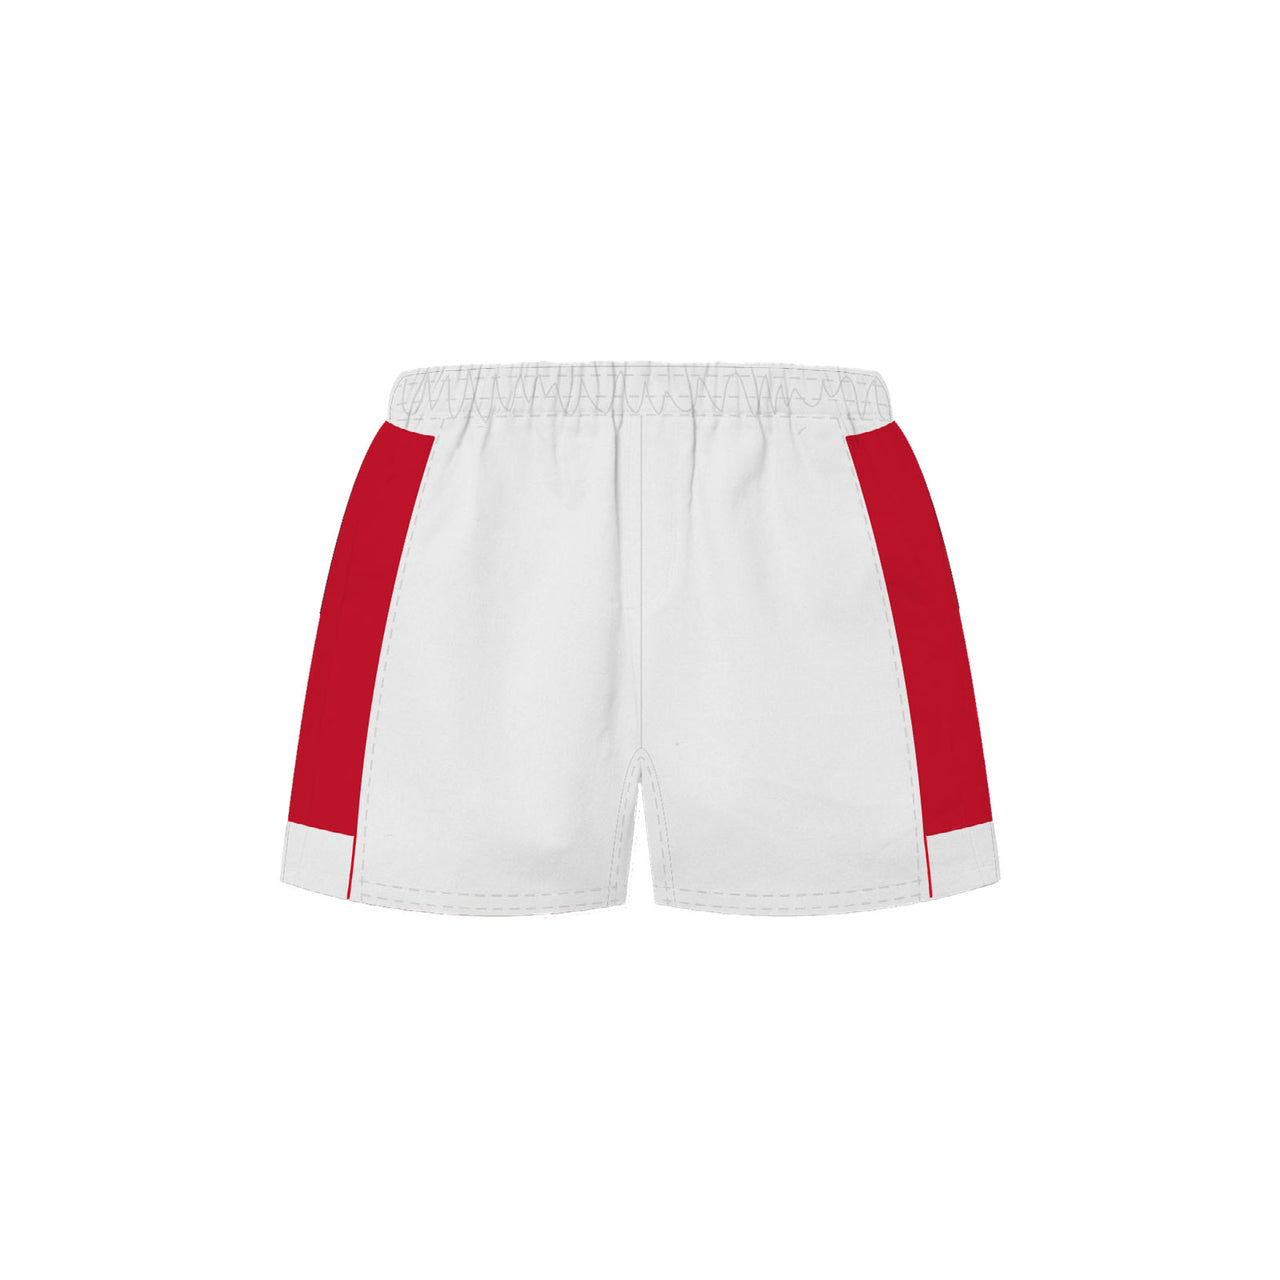 NYAC Rugby Game Day Shorts